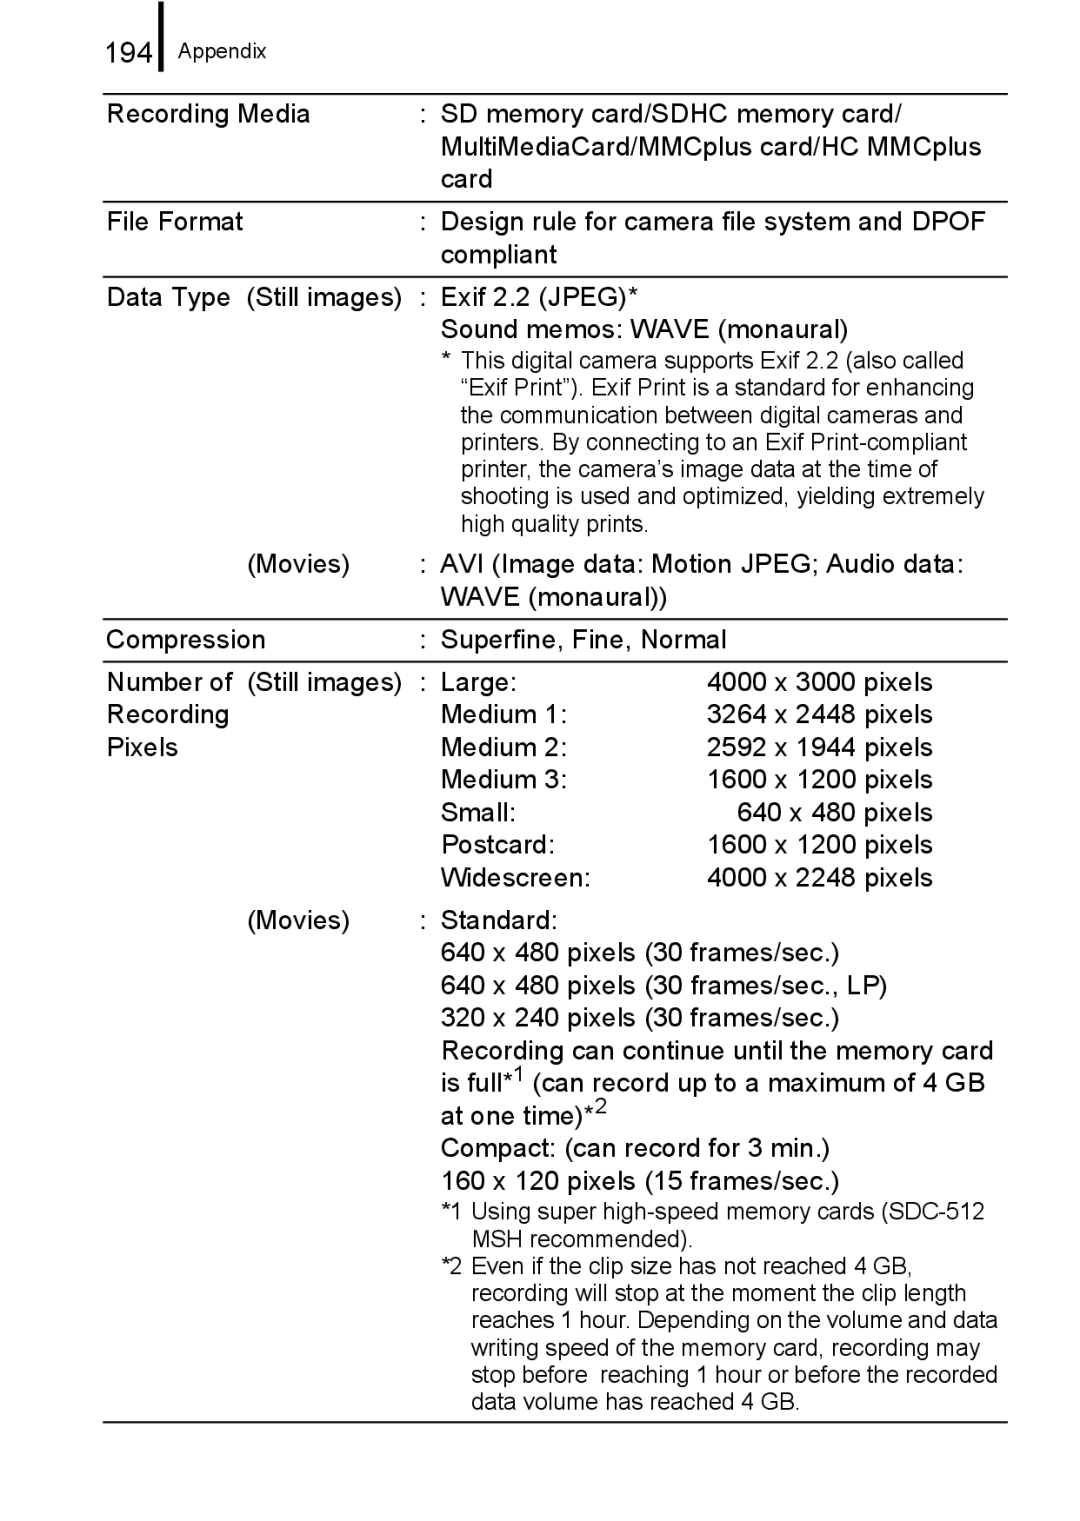 Canon A650 IS appendix 194, Using super high-speed memory cards SDC-512 MSH recommended 